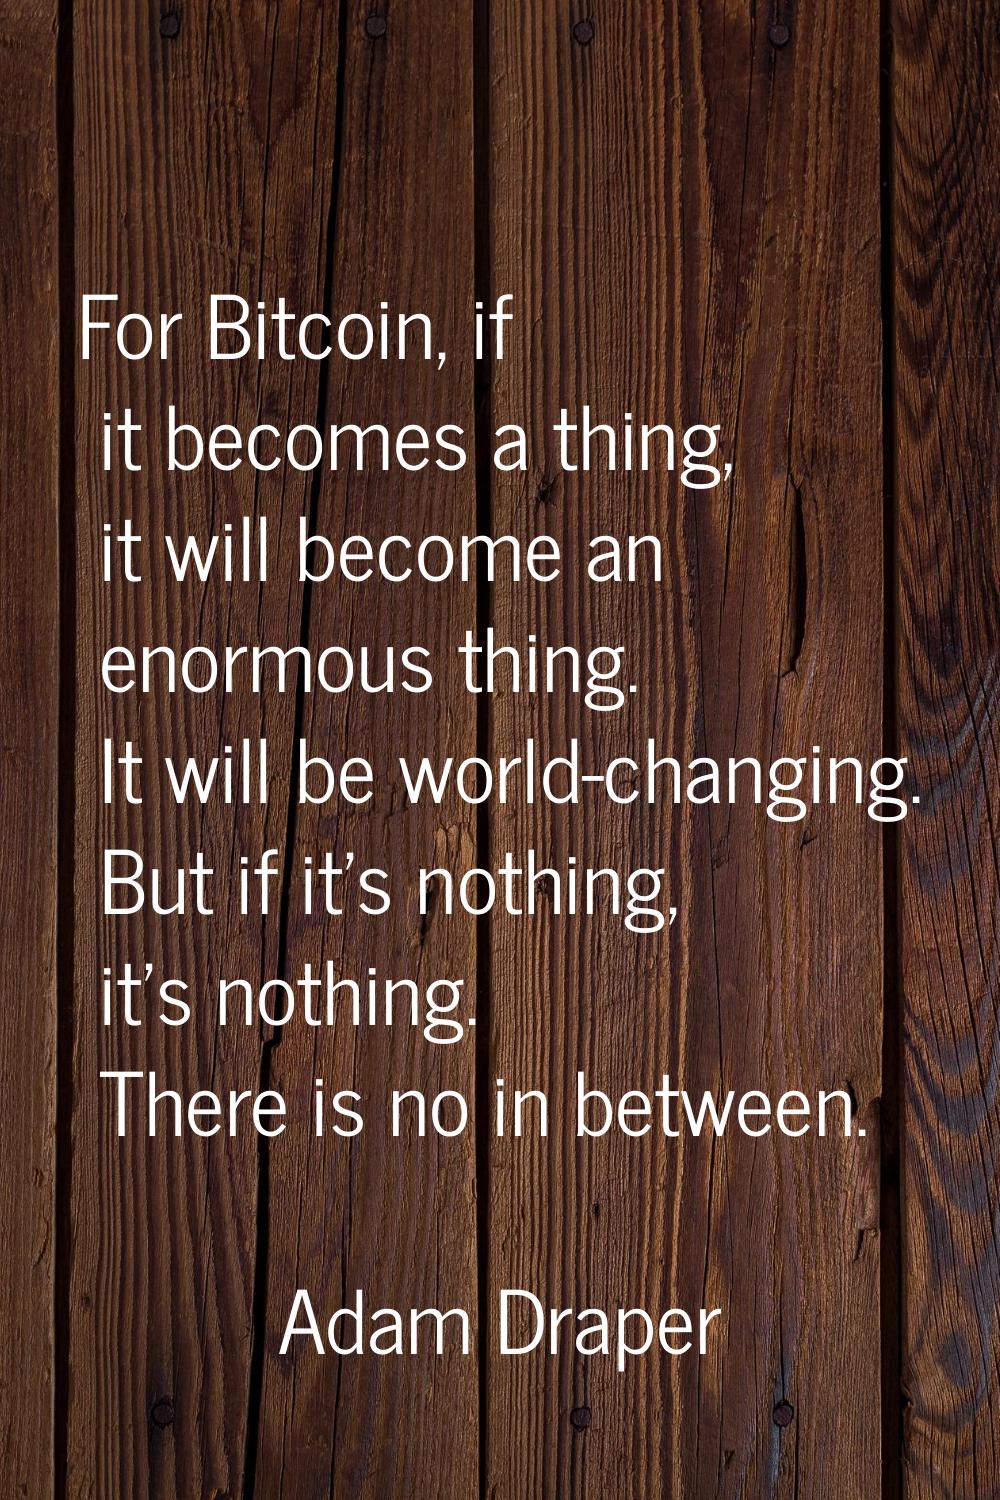 For Bitcoin, if it becomes a thing, it will become an enormous thing. It will be world-changing. Bu